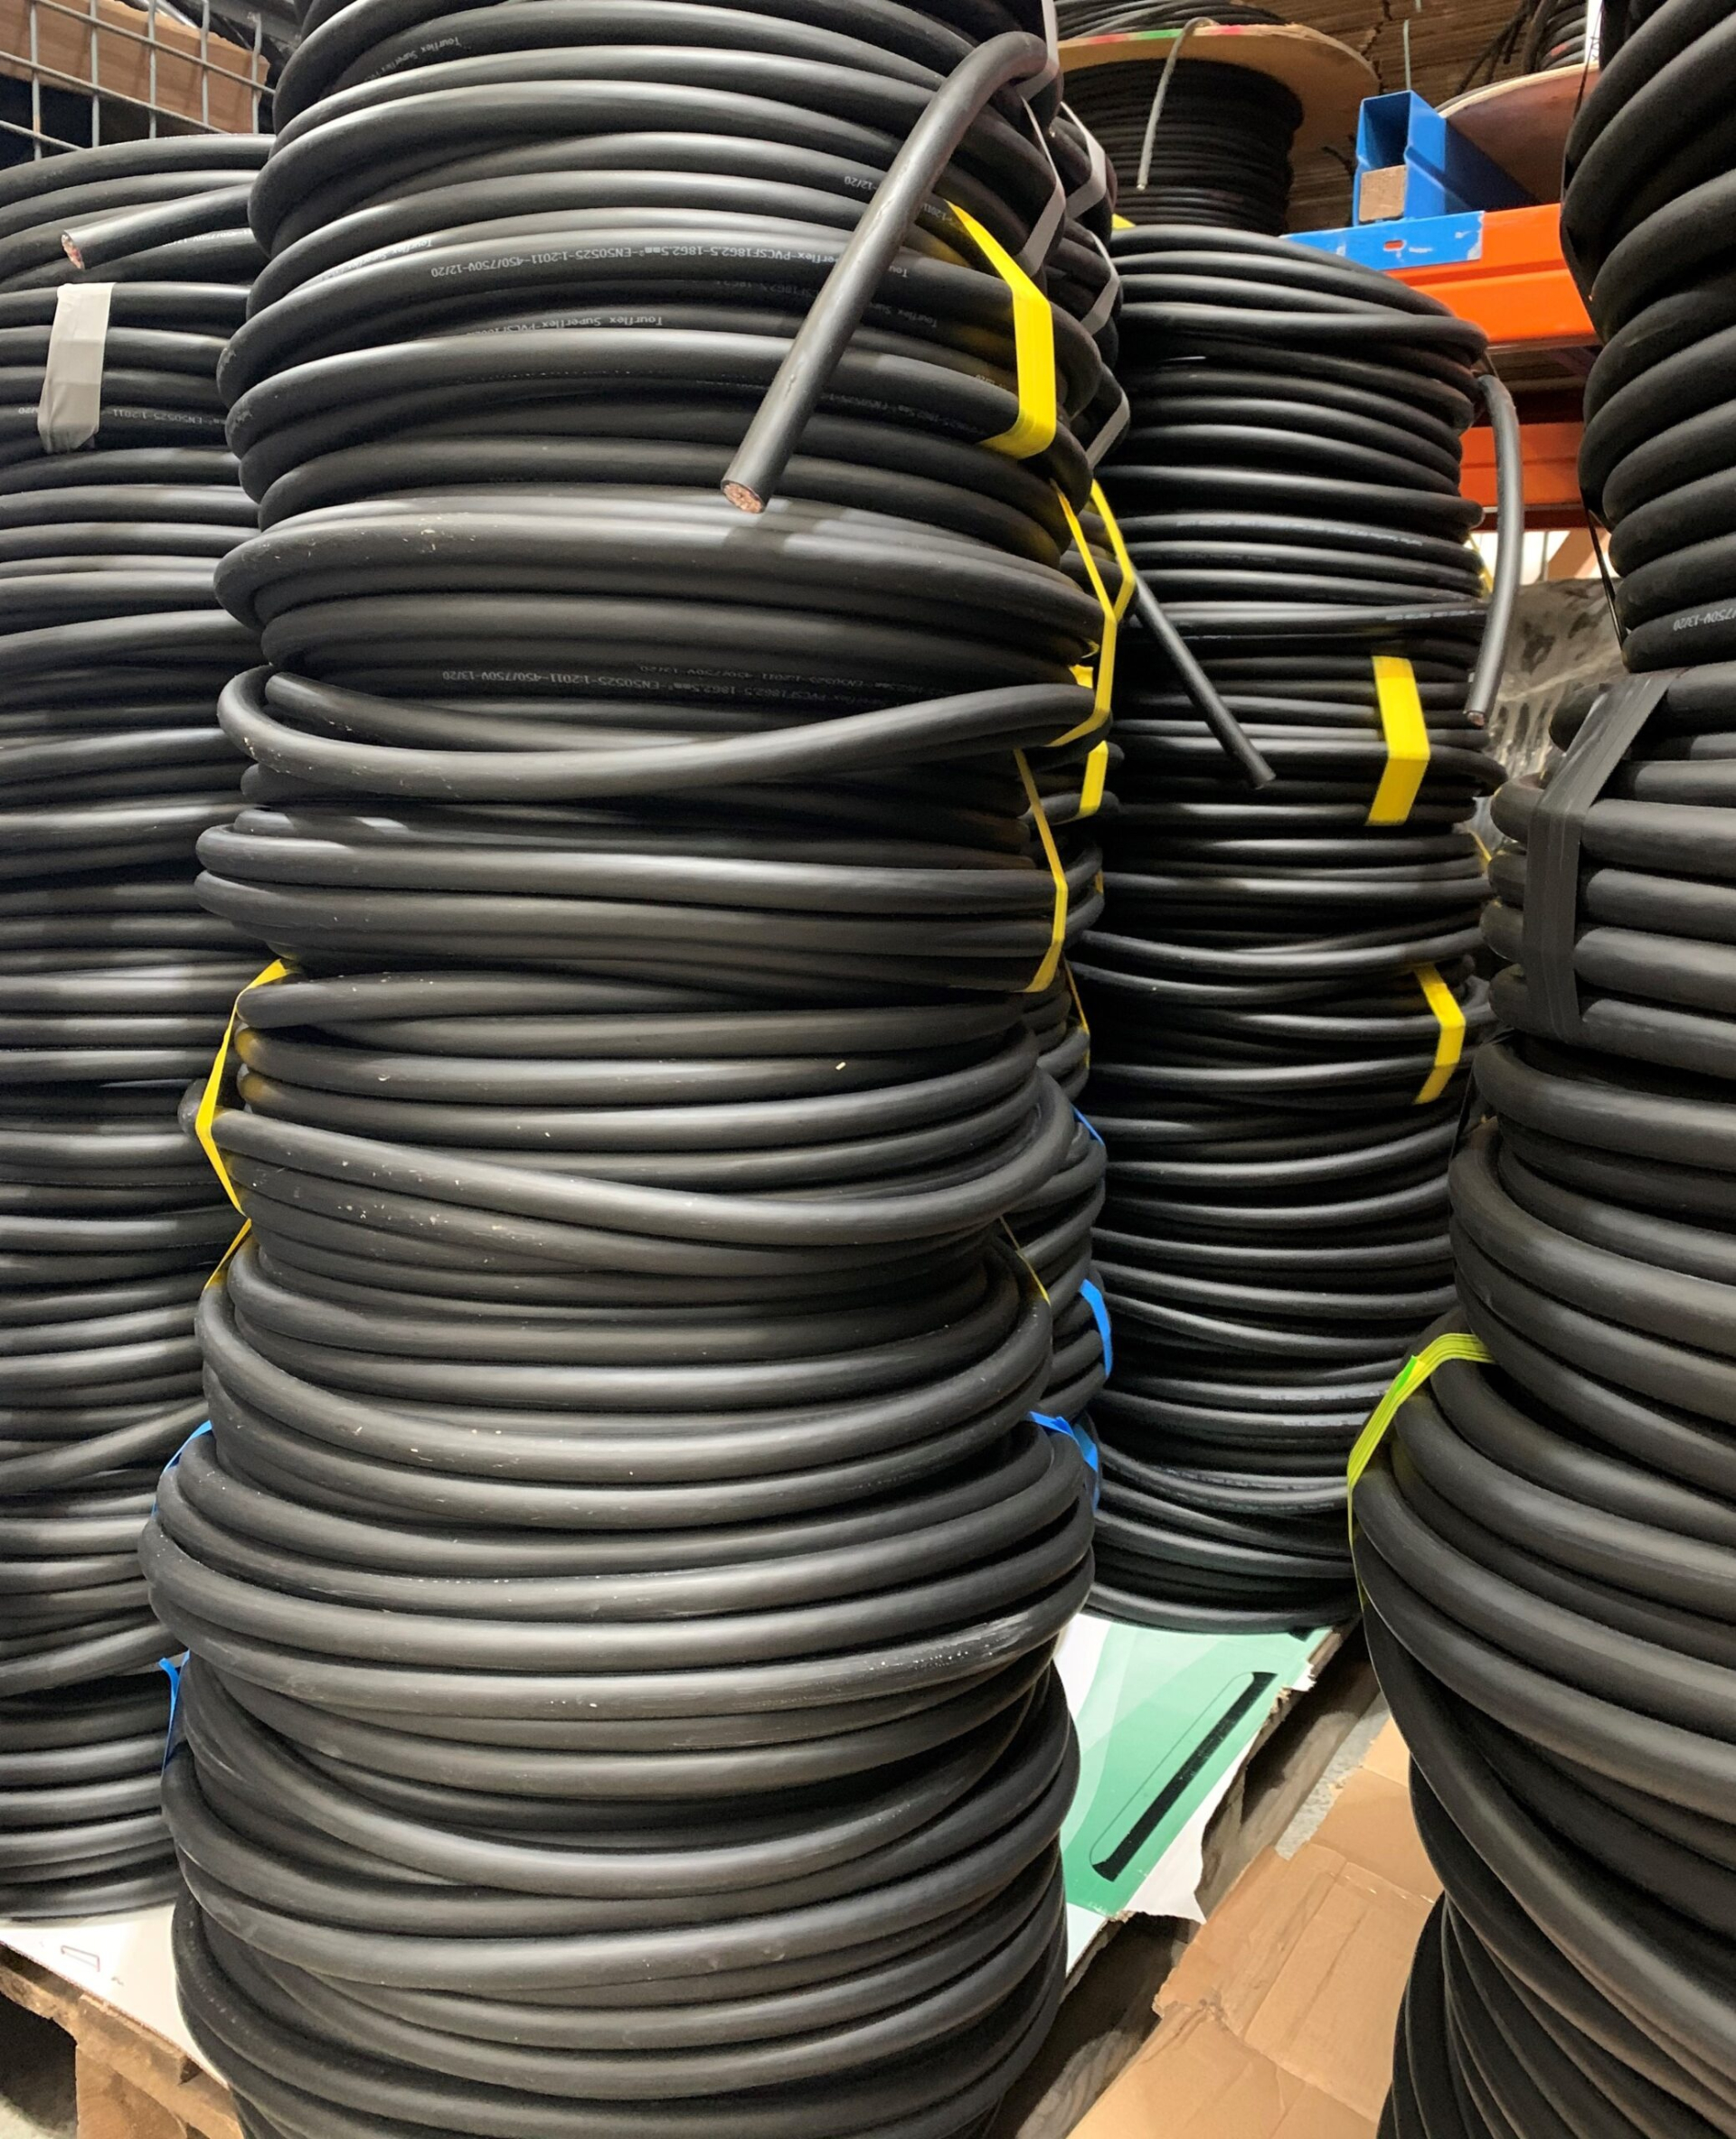 Tourflex Cabling - coiled cable lengths